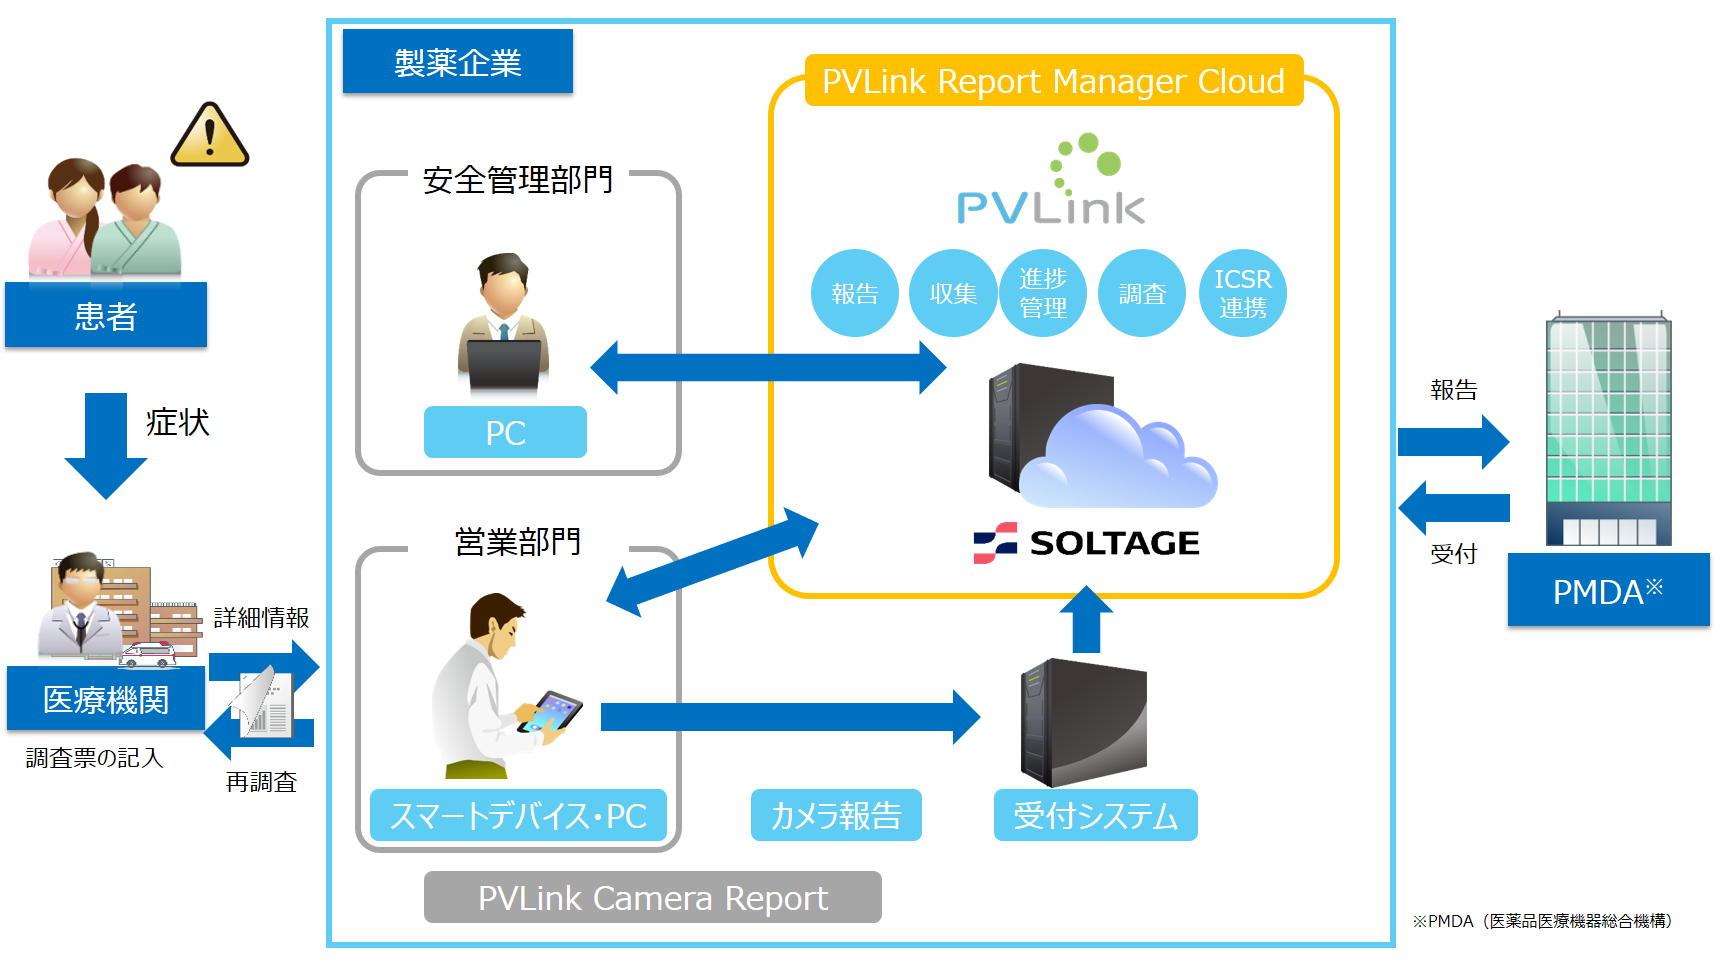 PVLink Report Manager Cloud概要図